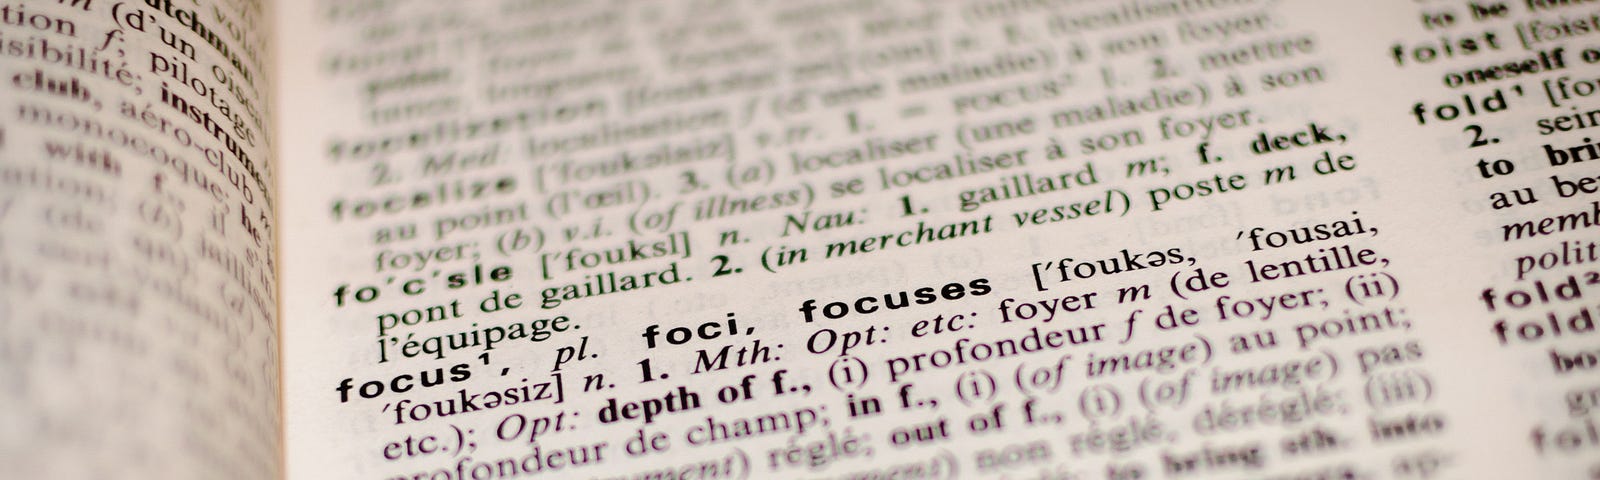 A picture of a dictionary with letters f, showing the word focus clearly.